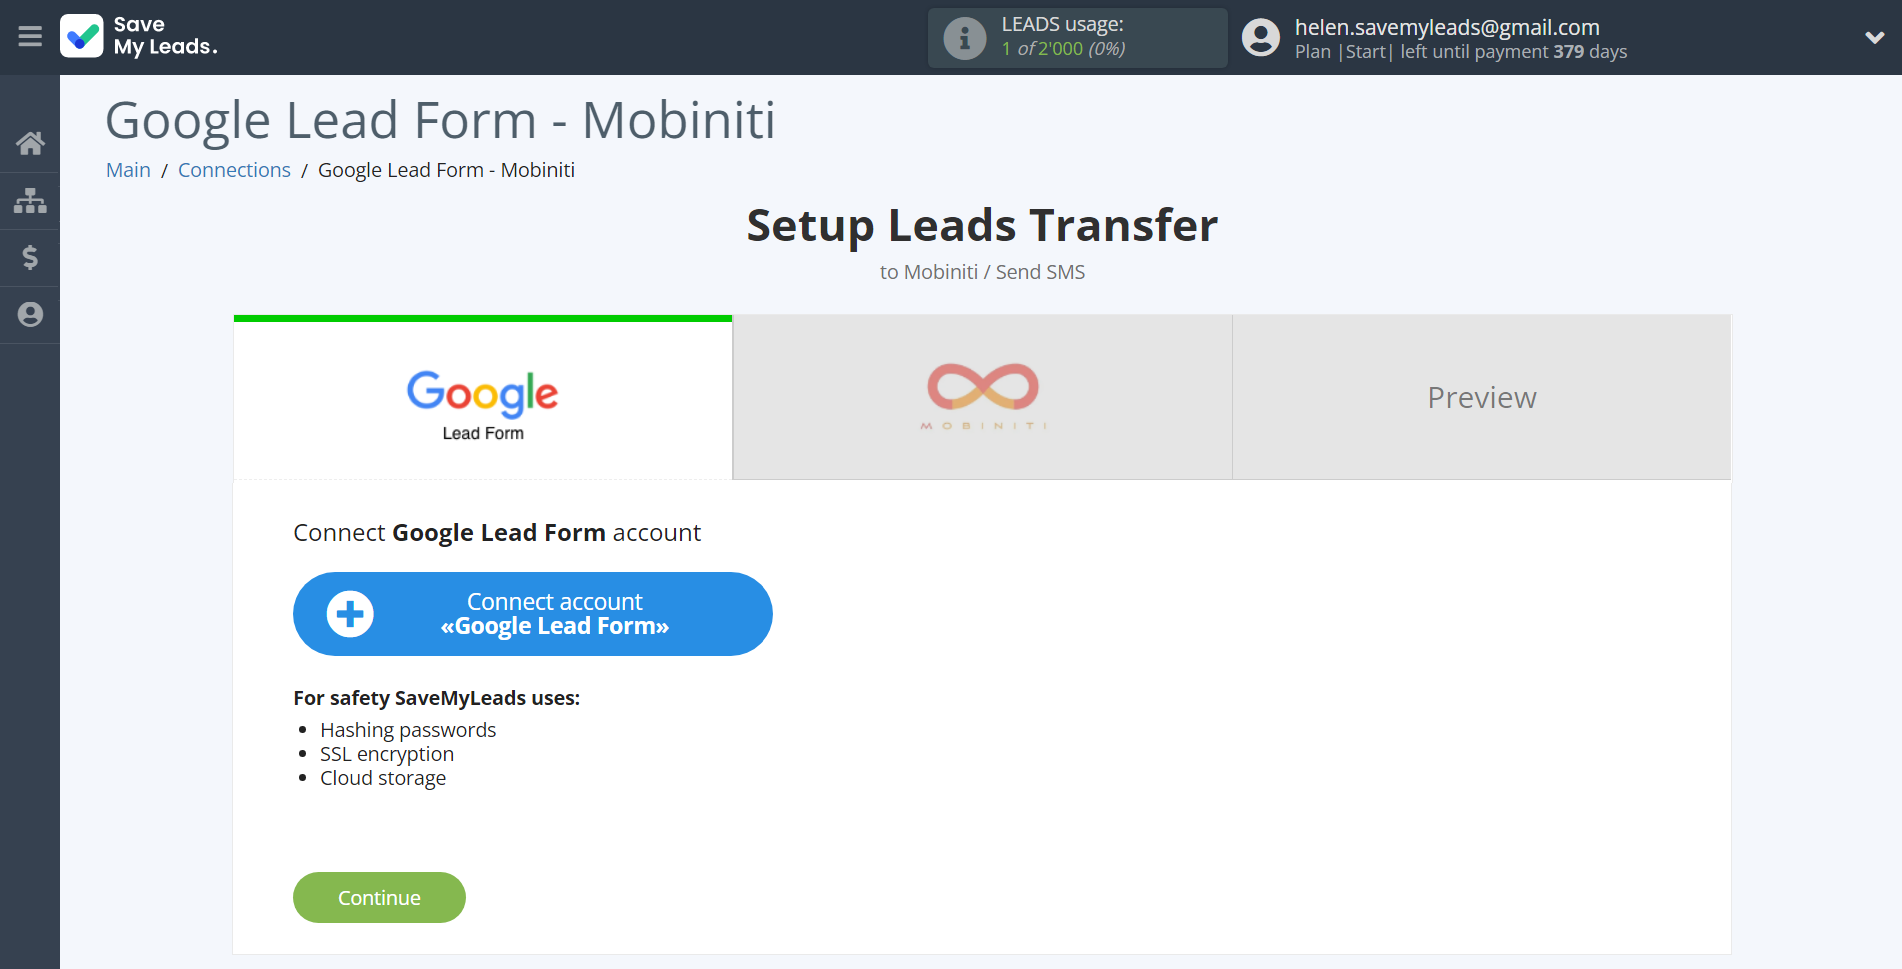 How to Connect Google Lead Form with Mobiniti | Data Source account